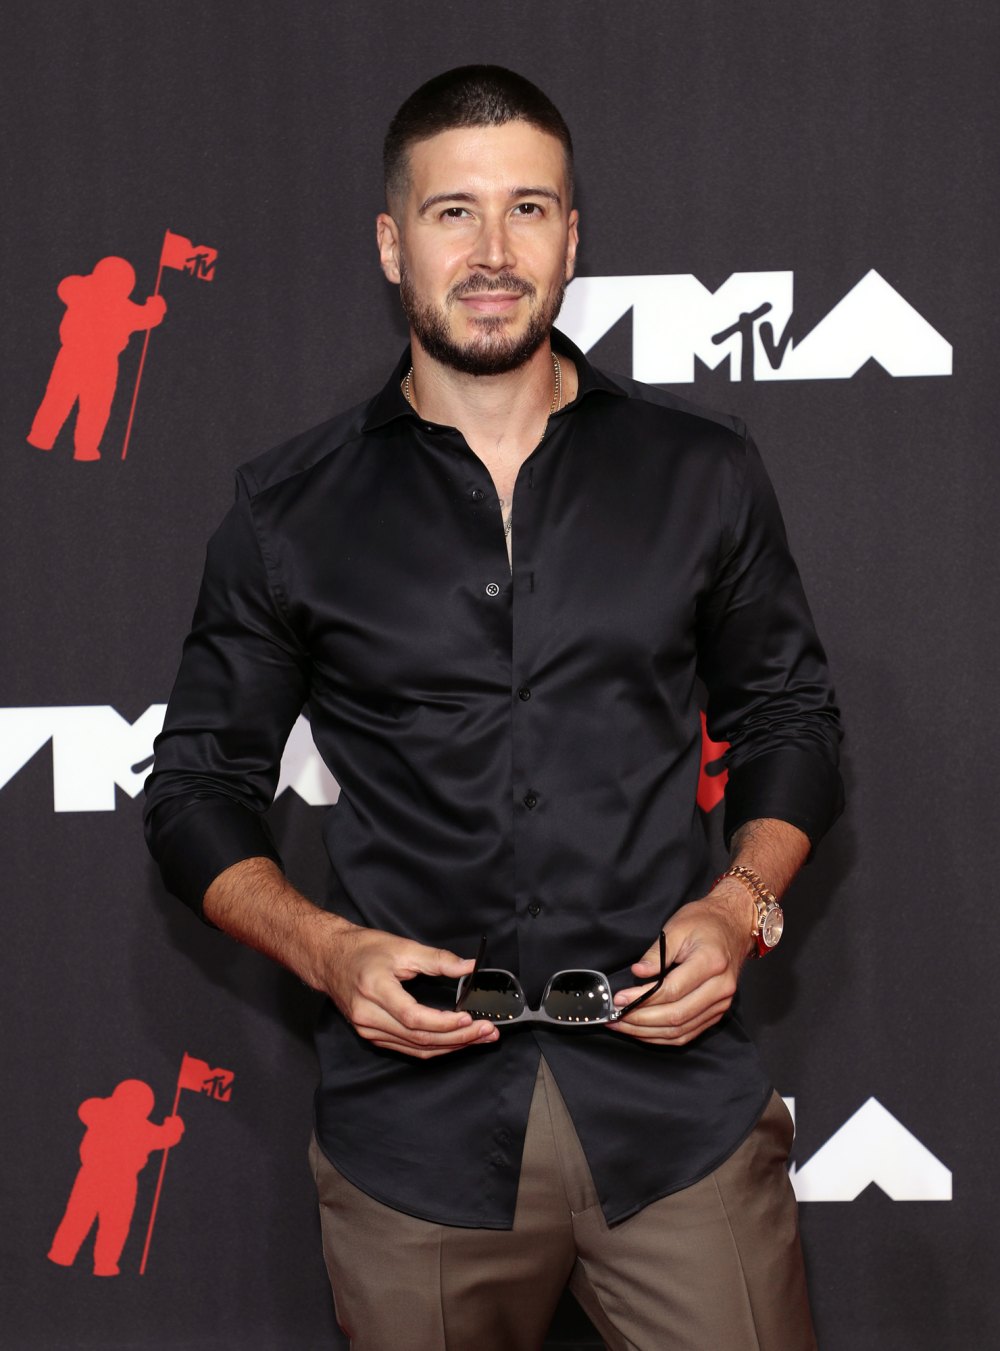 Vinny Guadagnino Compares Jersey Shore Salary to What He Made on DWTS